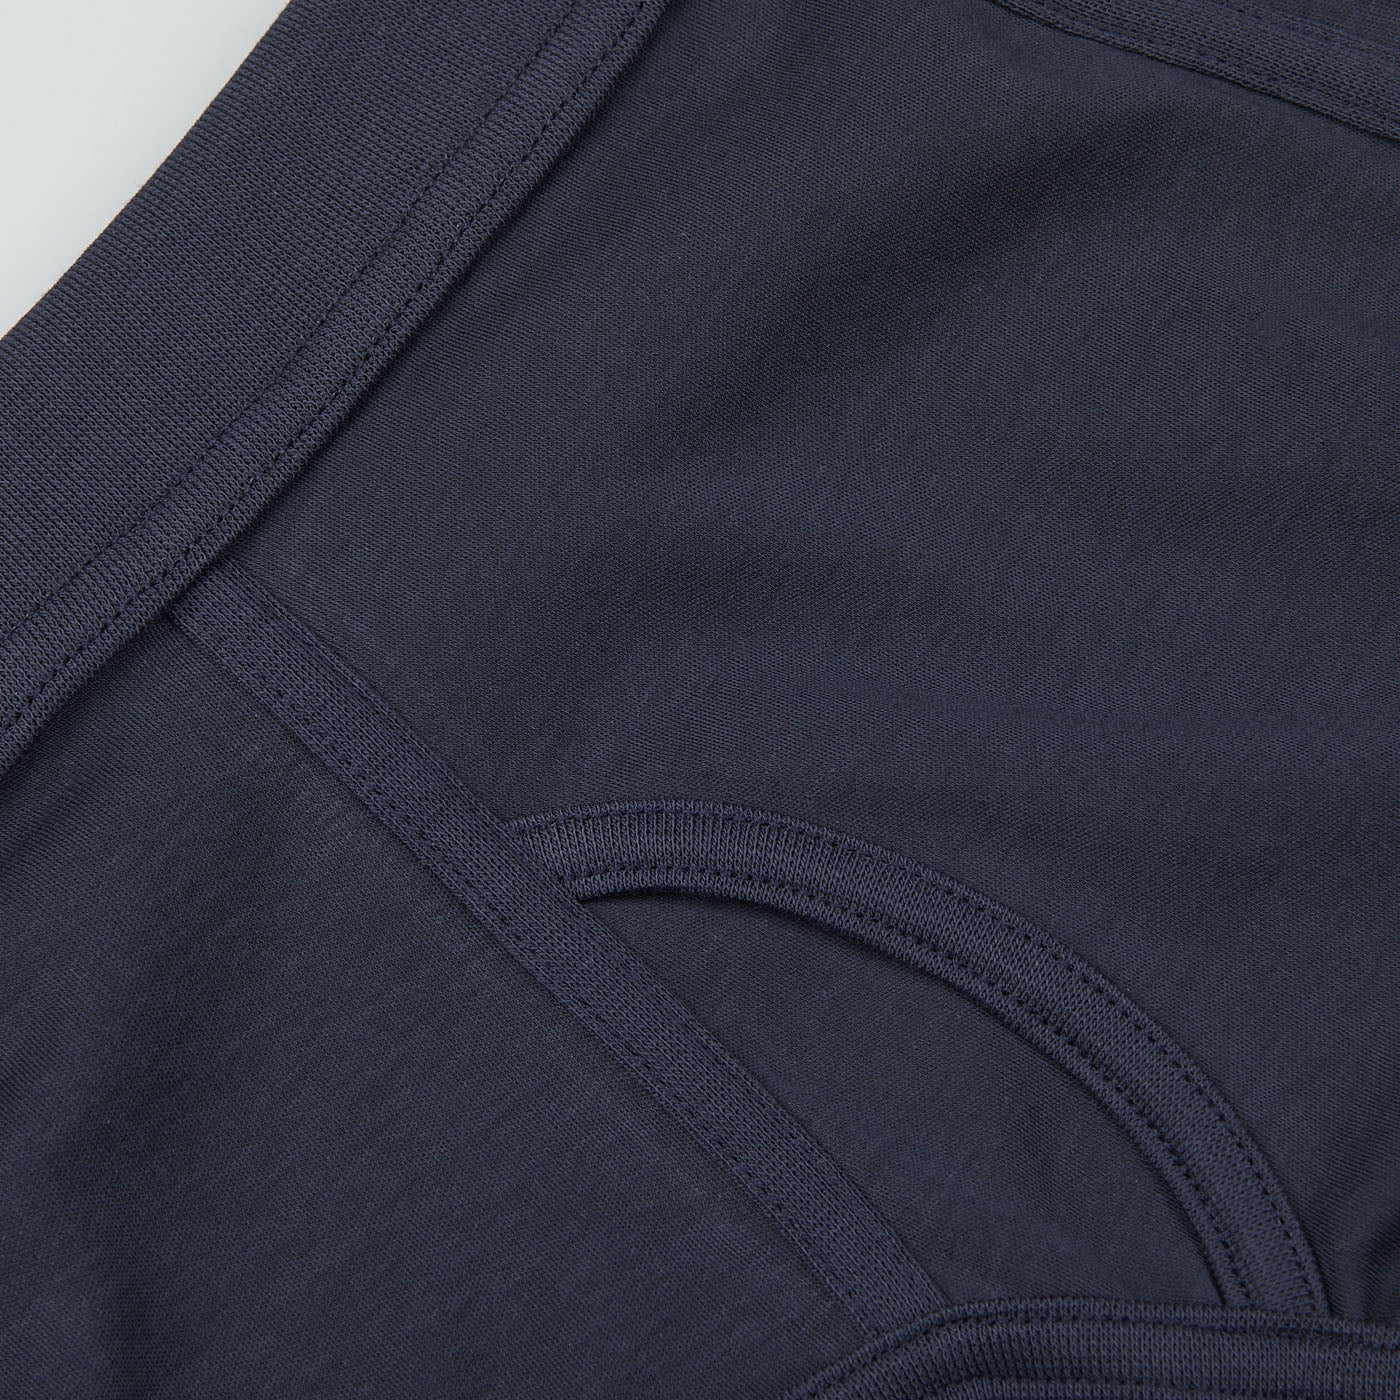 Close-up of a dark blue garment featuring seams and straps, reminiscent of a classic brief. The Parisian Night Pima Cotton Platan Briefs by The White Briefs exude the allure of a Parisian night thanks to their rich hue and are crafted from luxurious organic pima cotton.